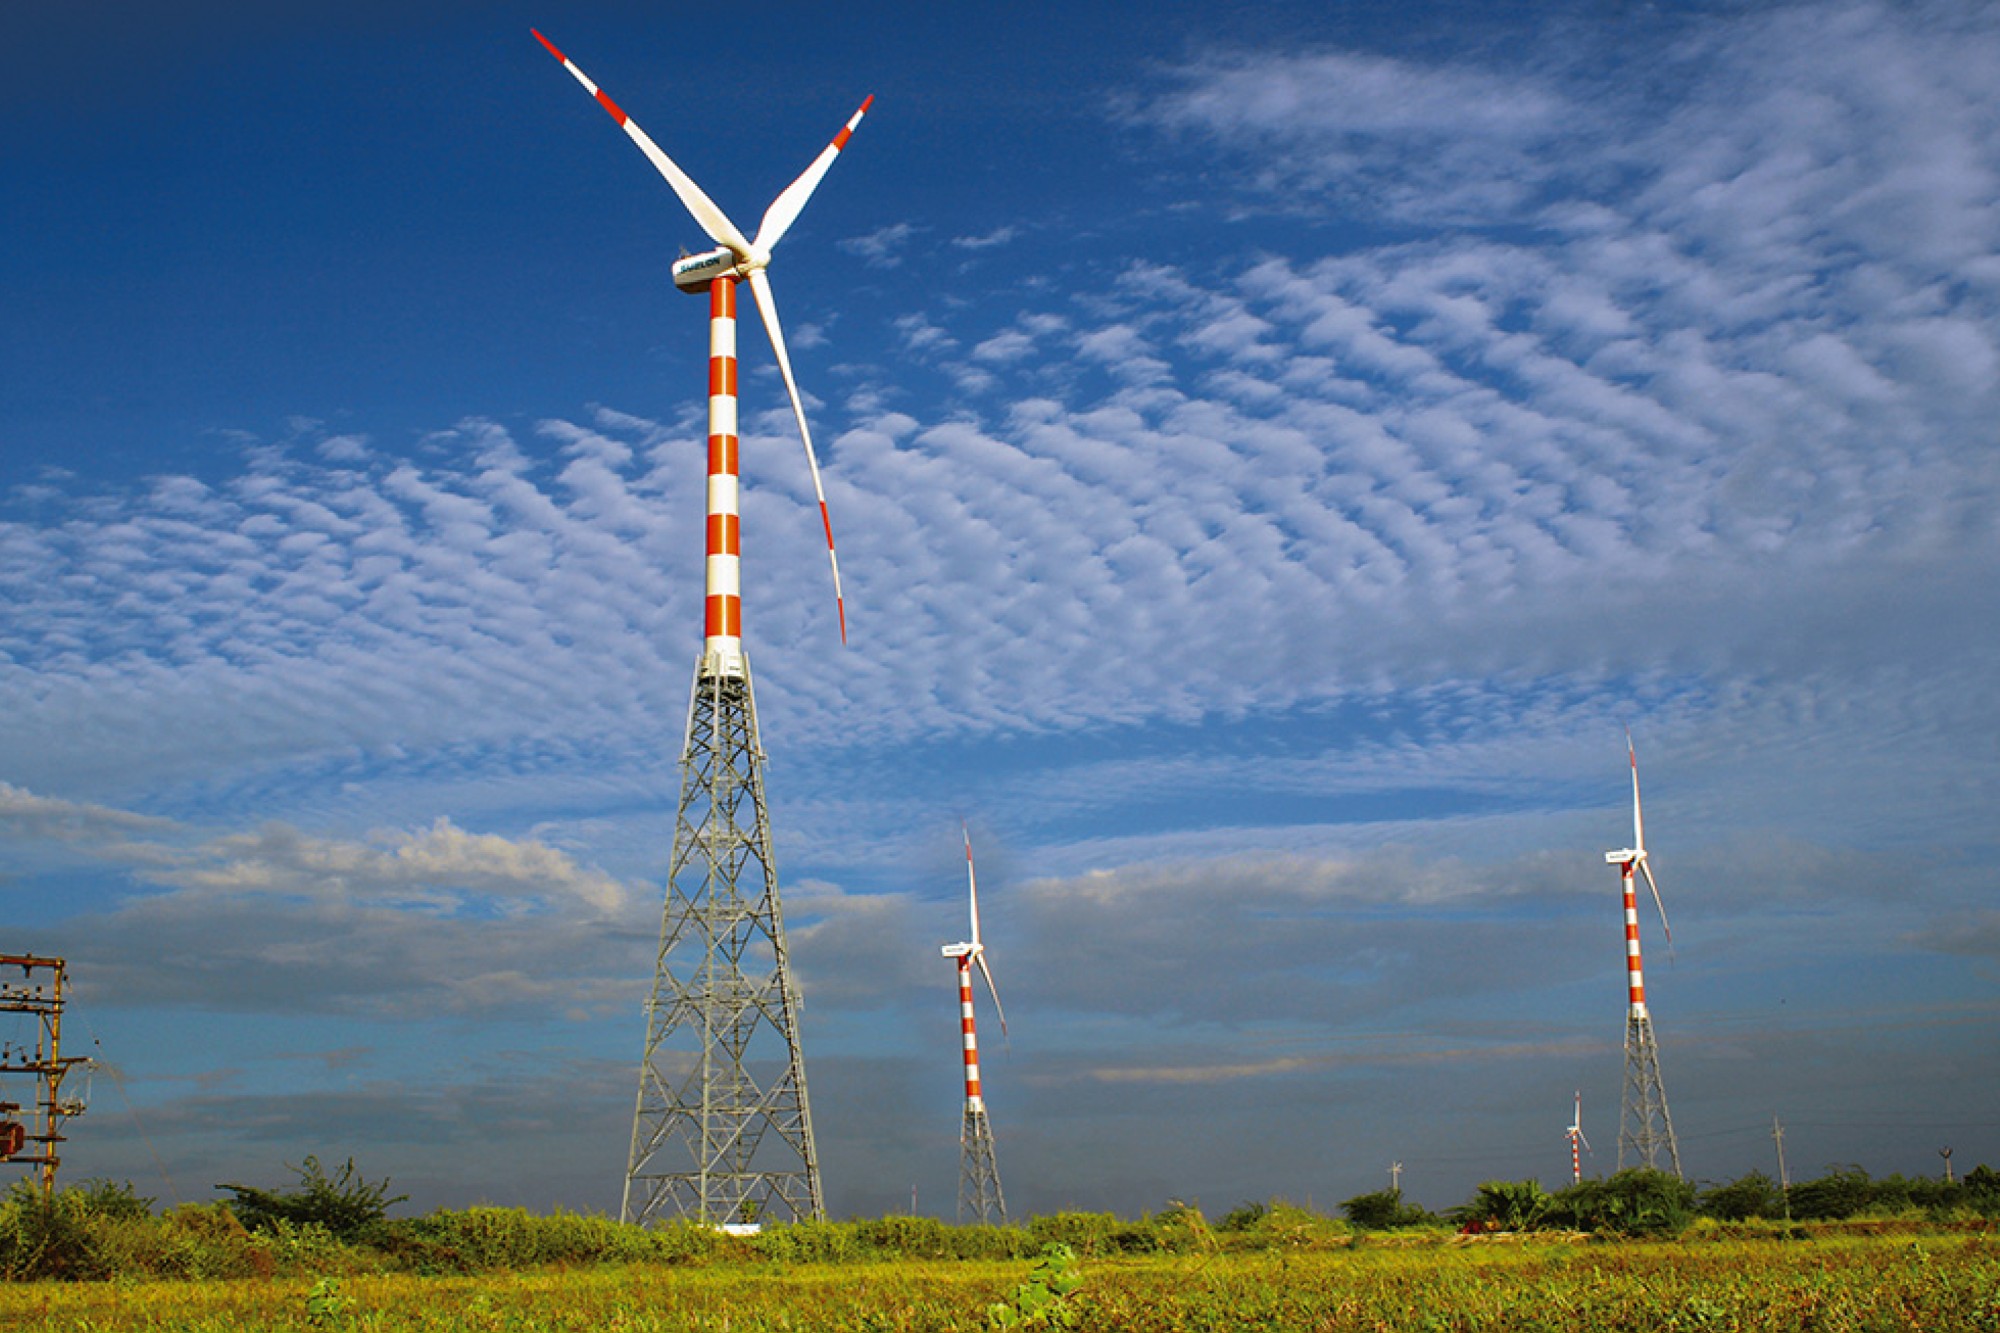 Suzlon secures 225 MW order for their 3 MV series